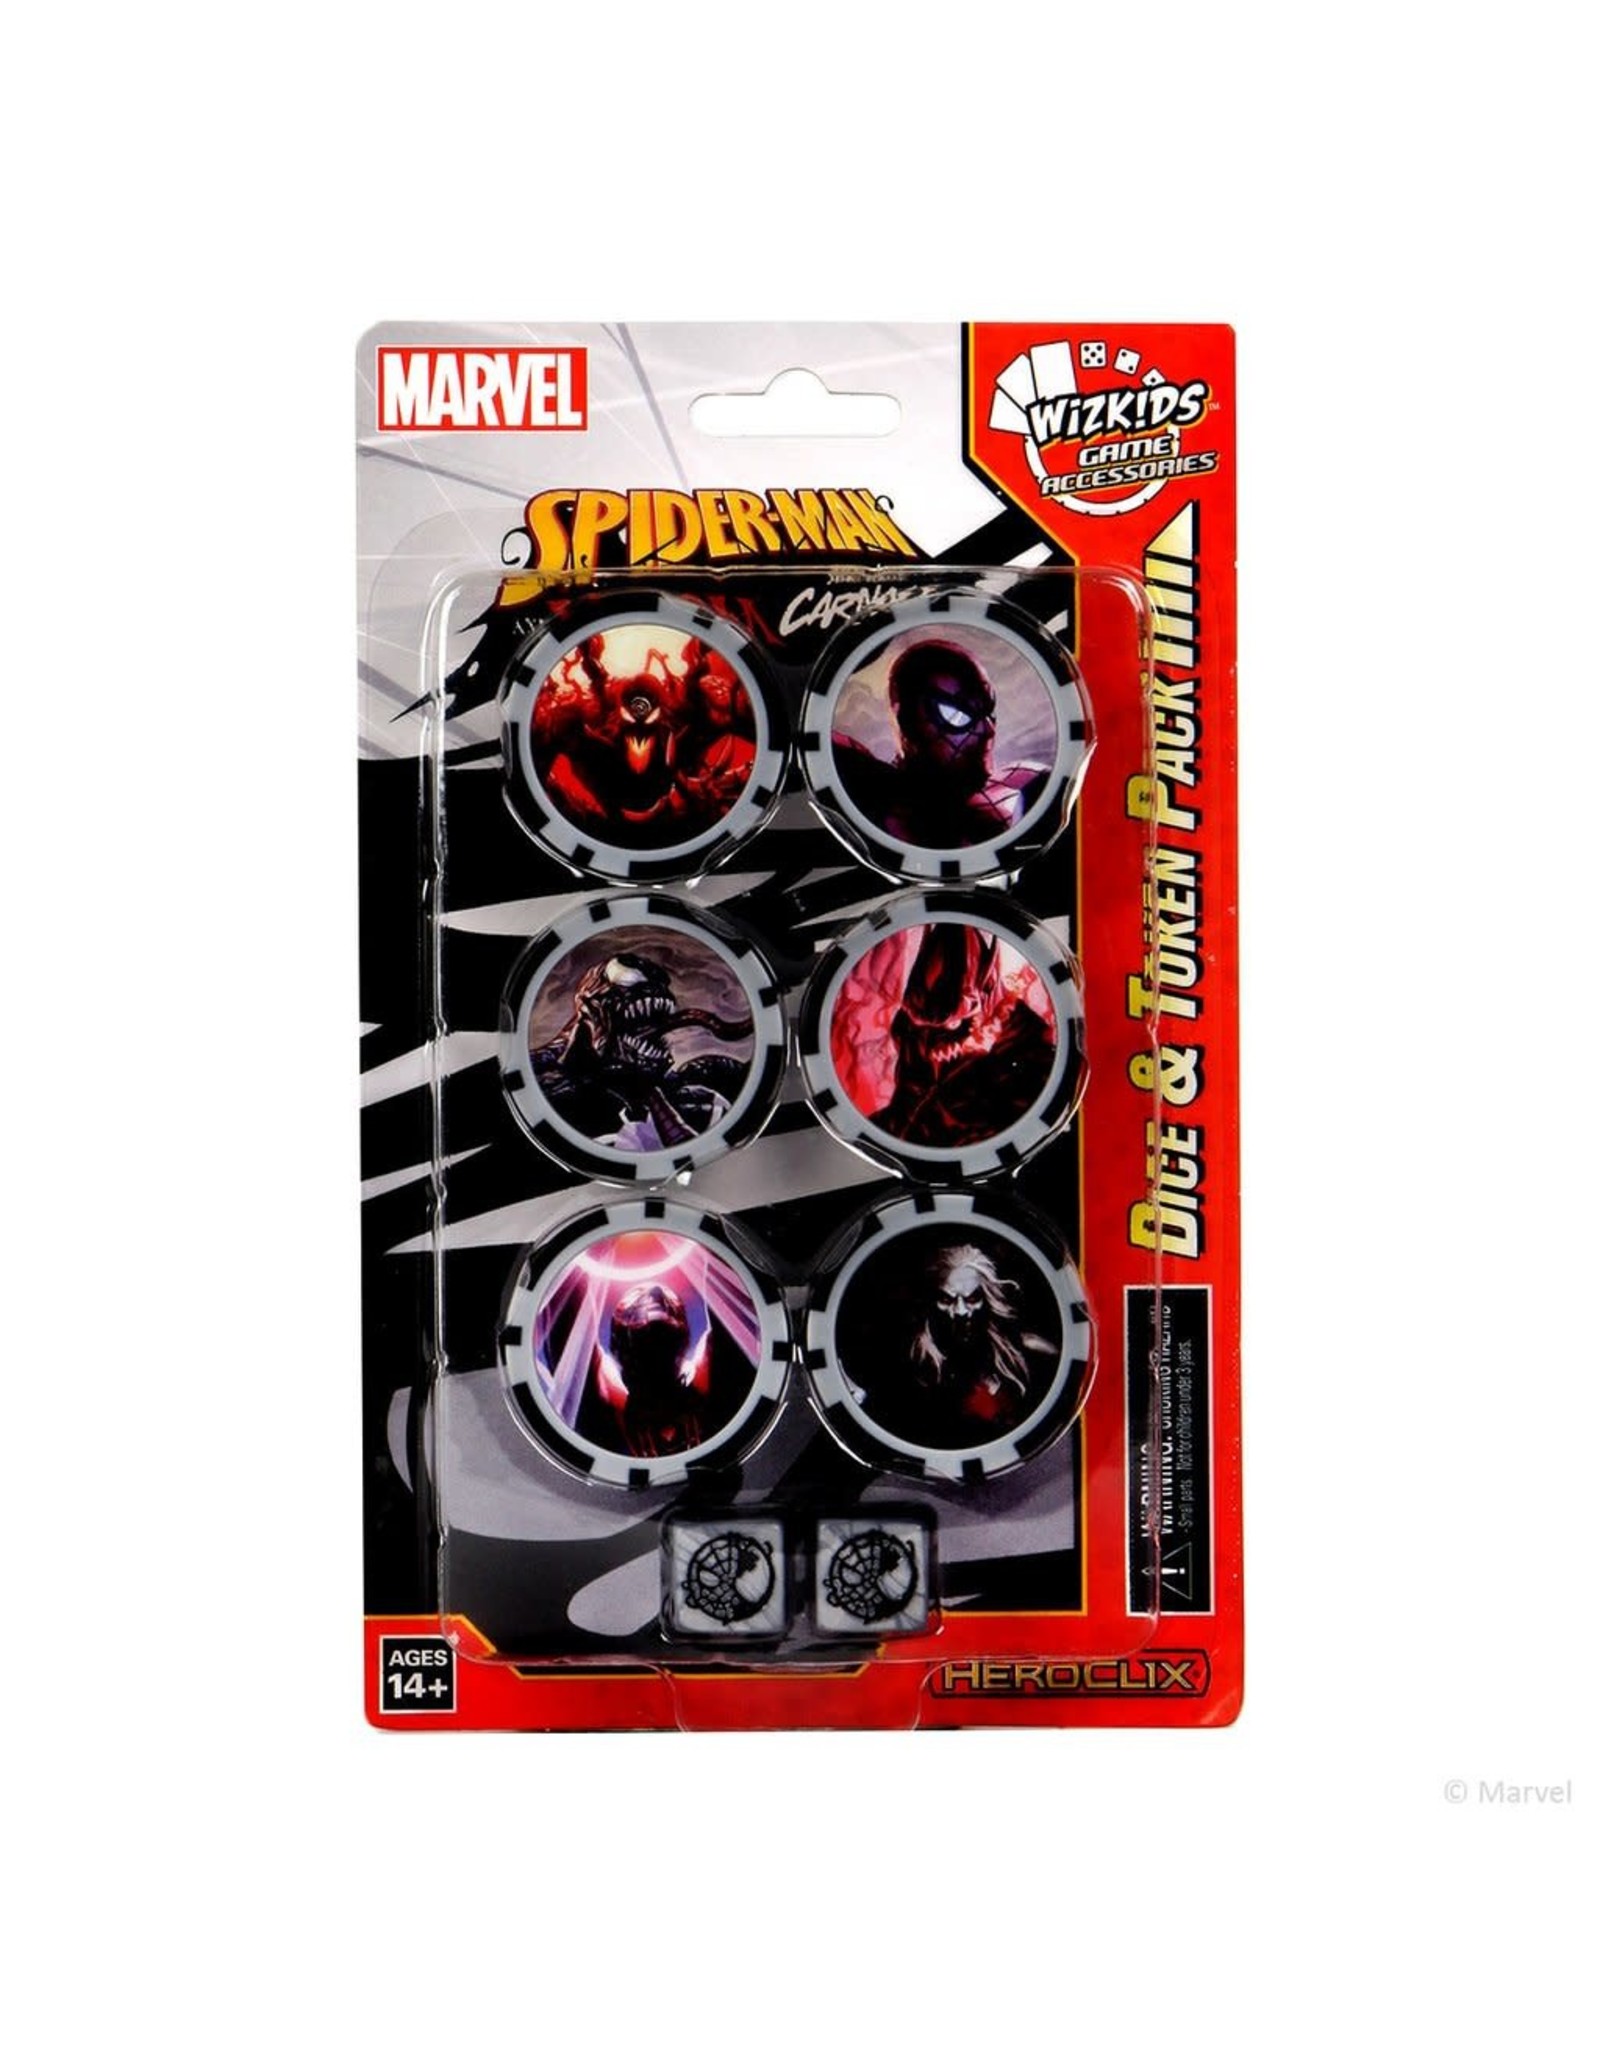 Wizkids Marvel HeroClix: Spider-Man and Venom Absolute Carnage Dice and Token Pack